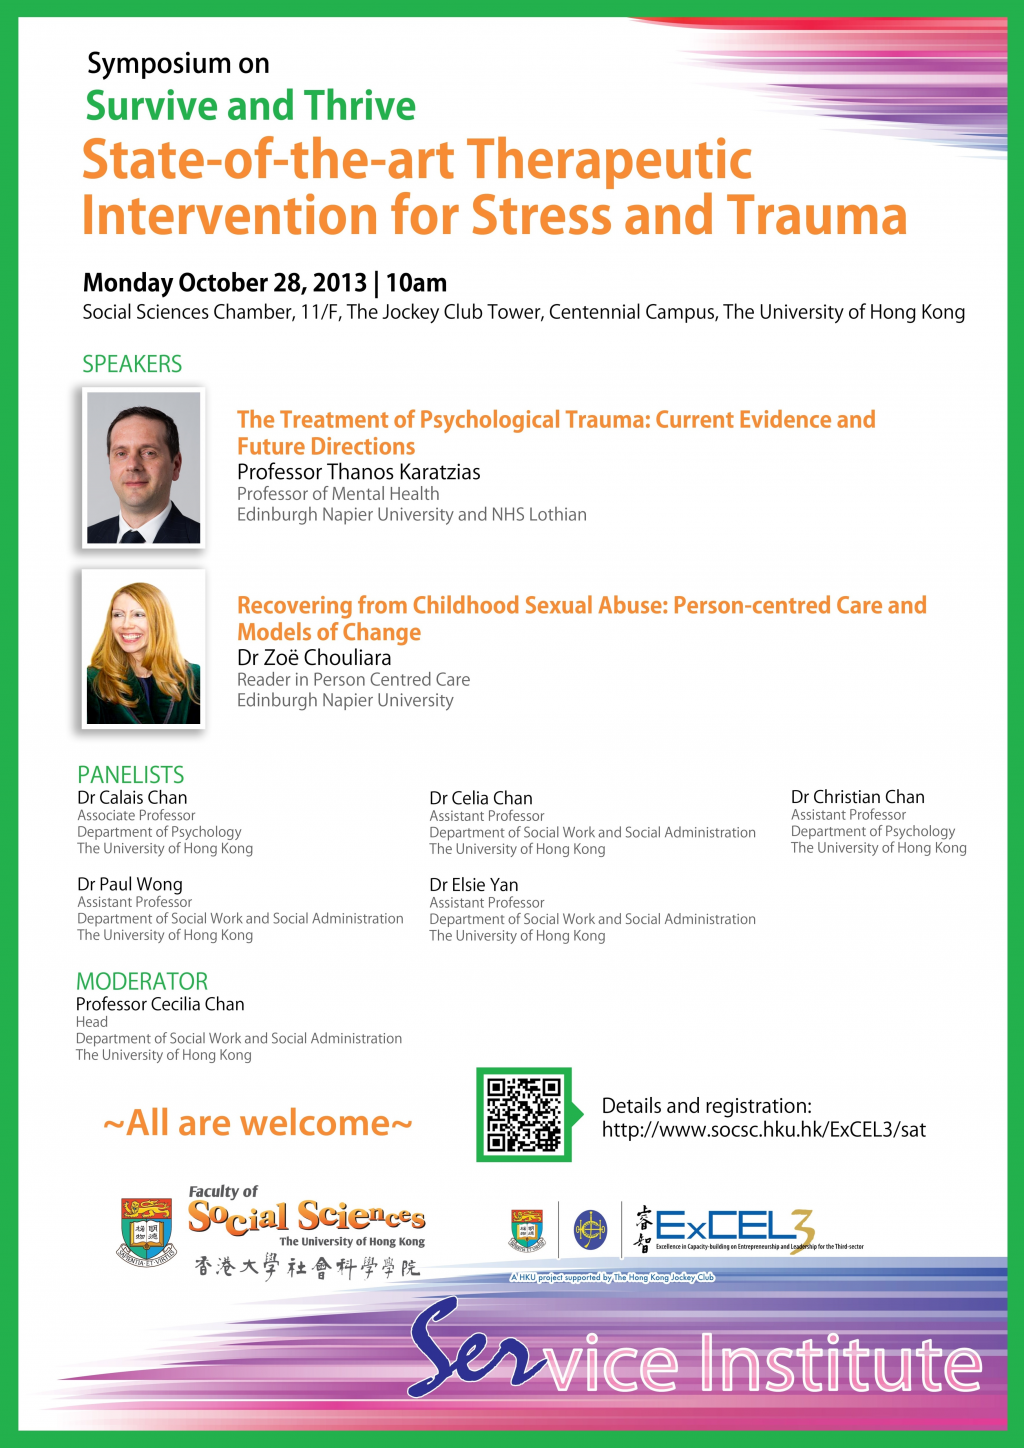 Symposium on Survive and Thrive: State-of-the-art Therapeutic Intervention for Stress and Trauma